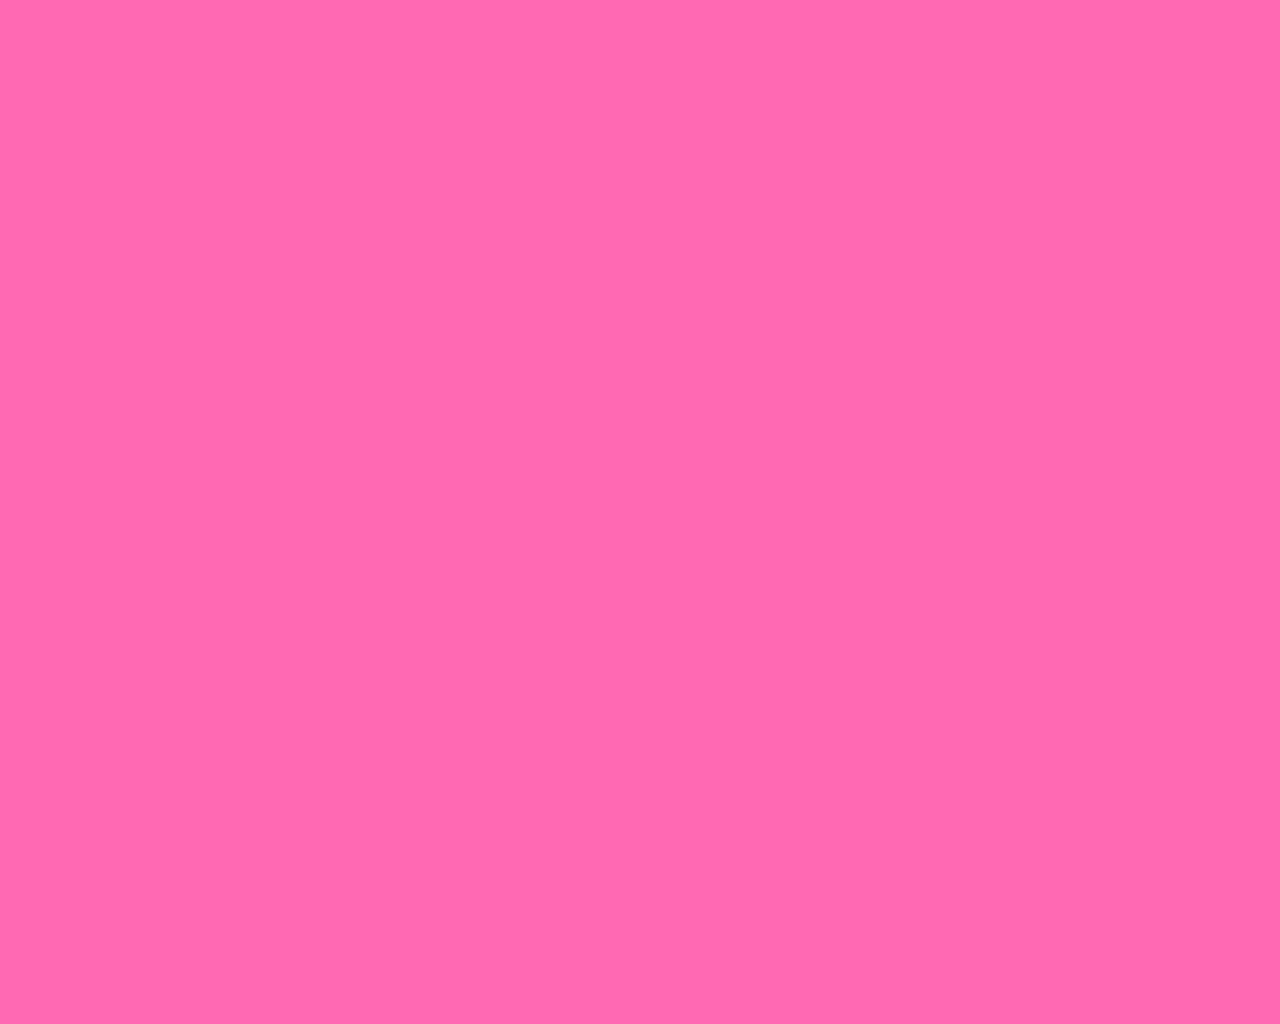 Solid Neon Pink Background Ing Gallery